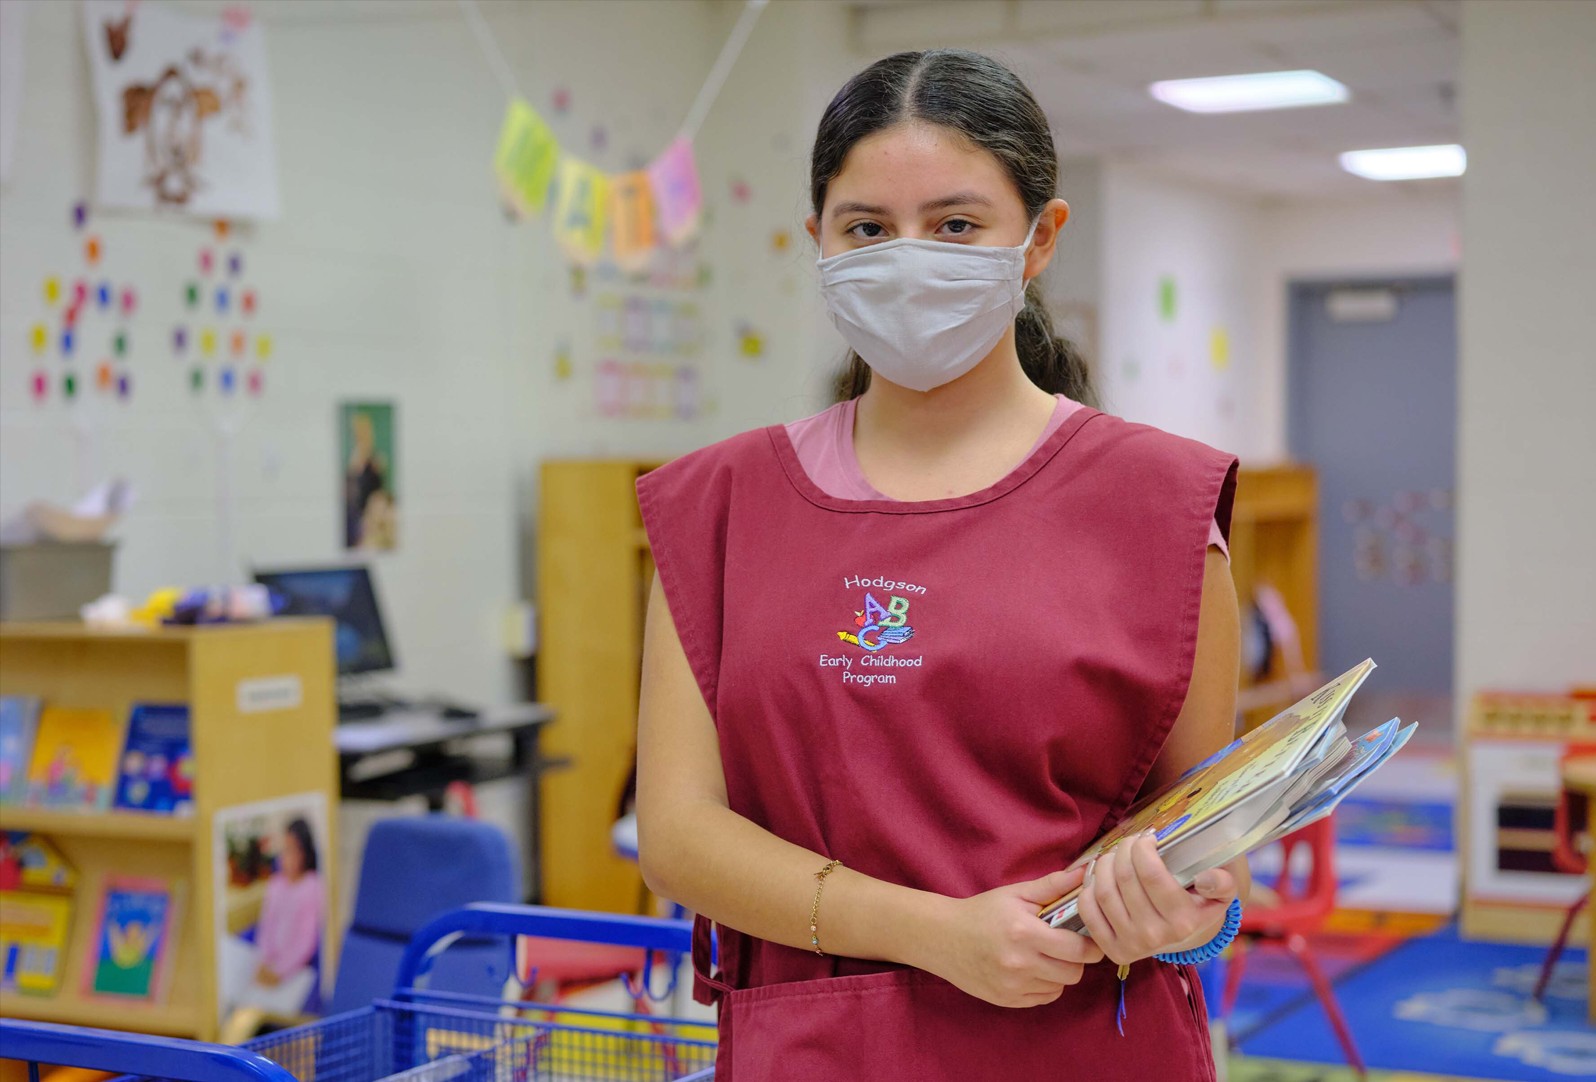 Students in Delaware participate in the state‘s expanded career pathways program, including programs in health care and early childhood education.